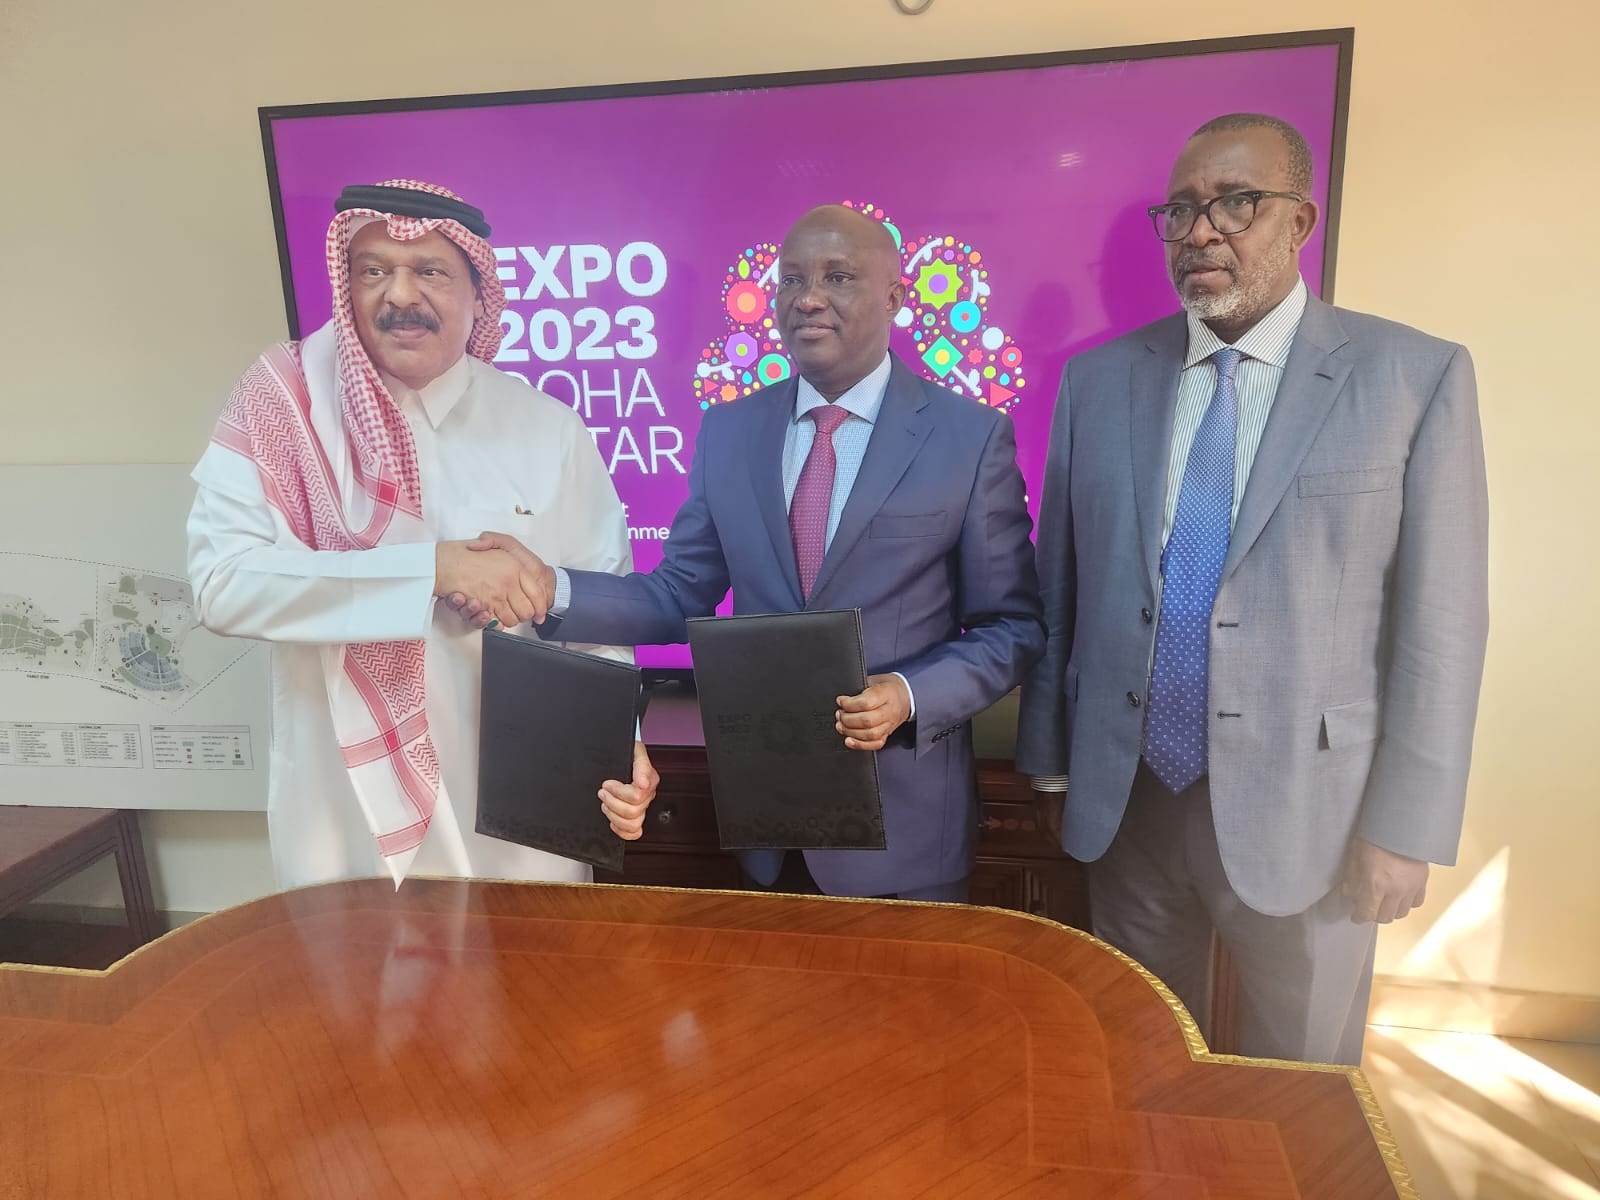 SIGNING OF THE EXPO 2023 CONTRACT